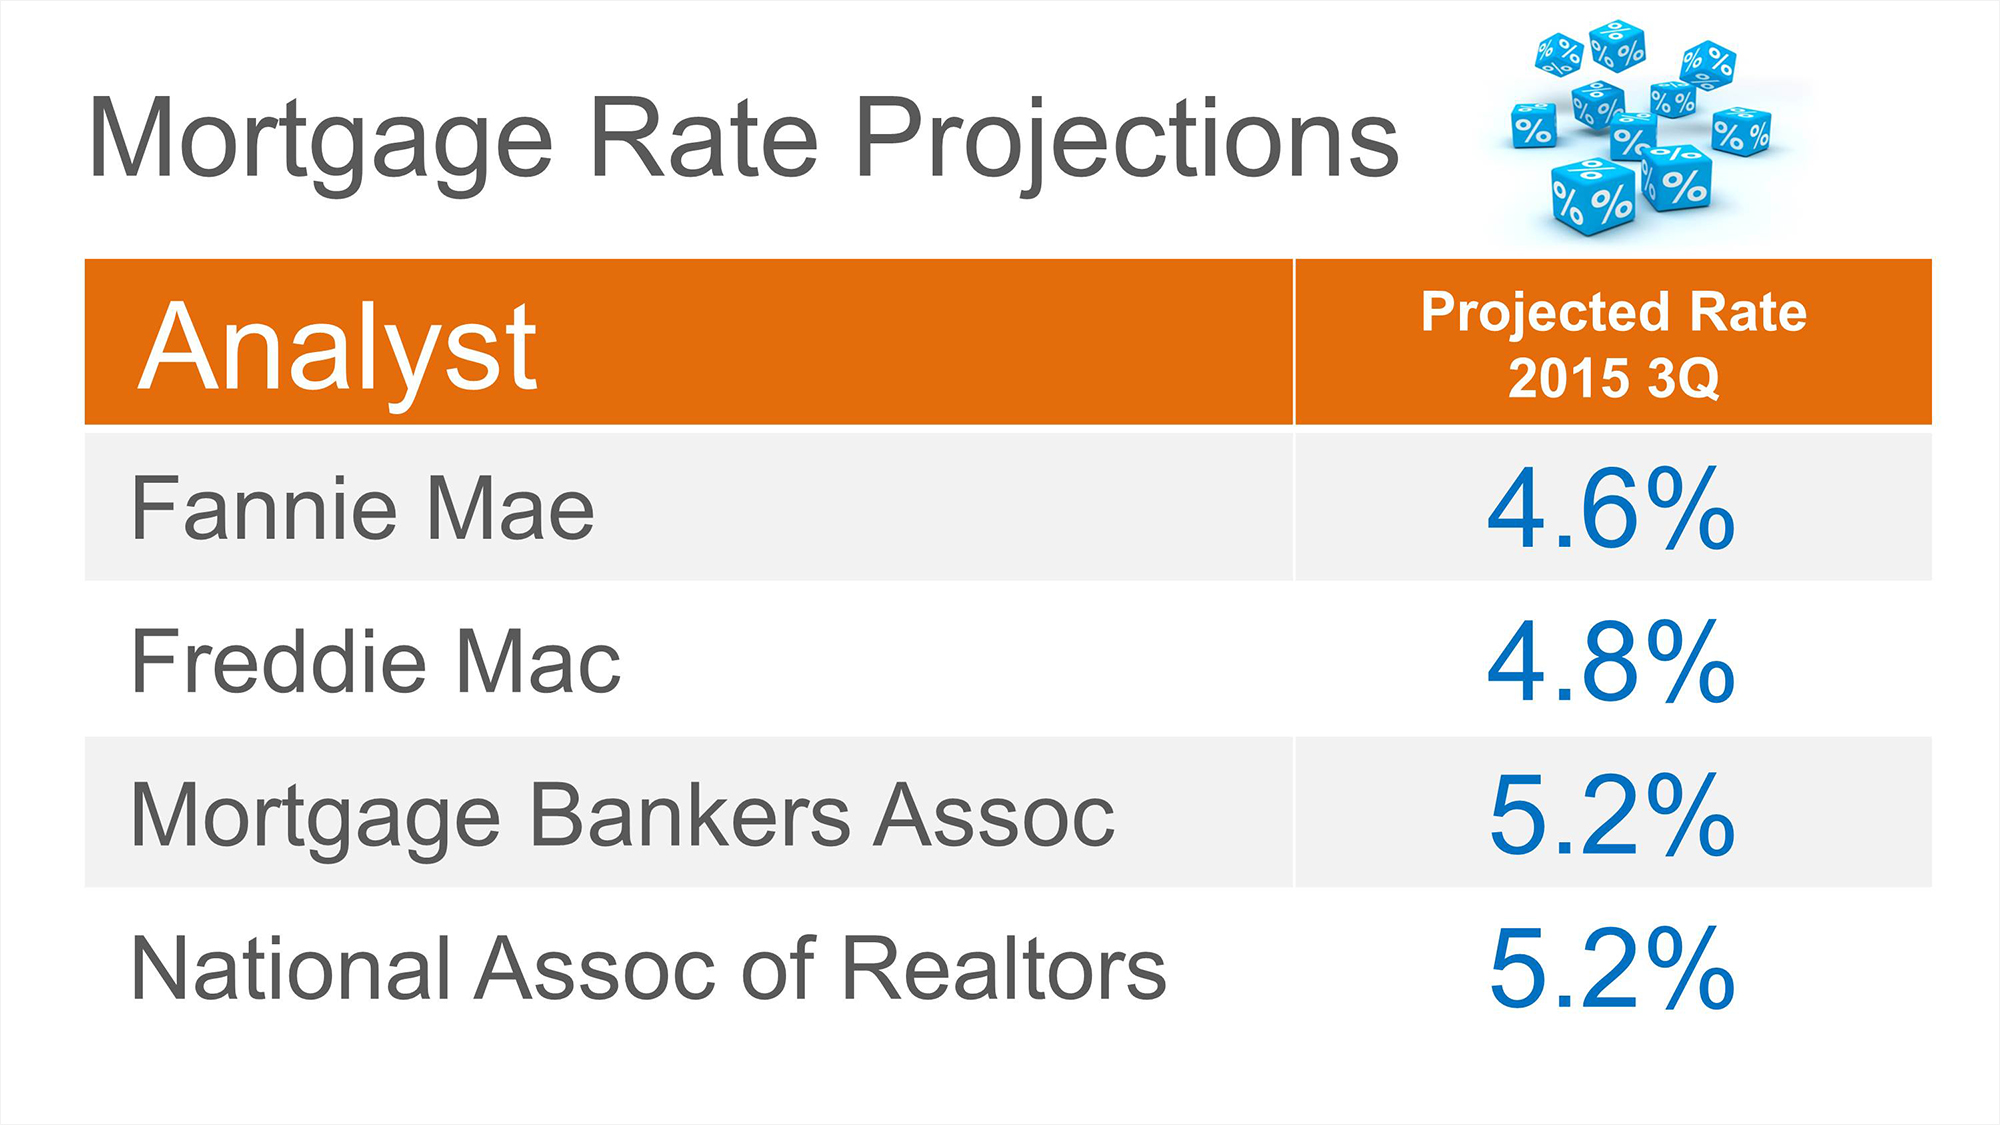 Where Do The Experts Think Interest Rates Will Be This Time Next Year?